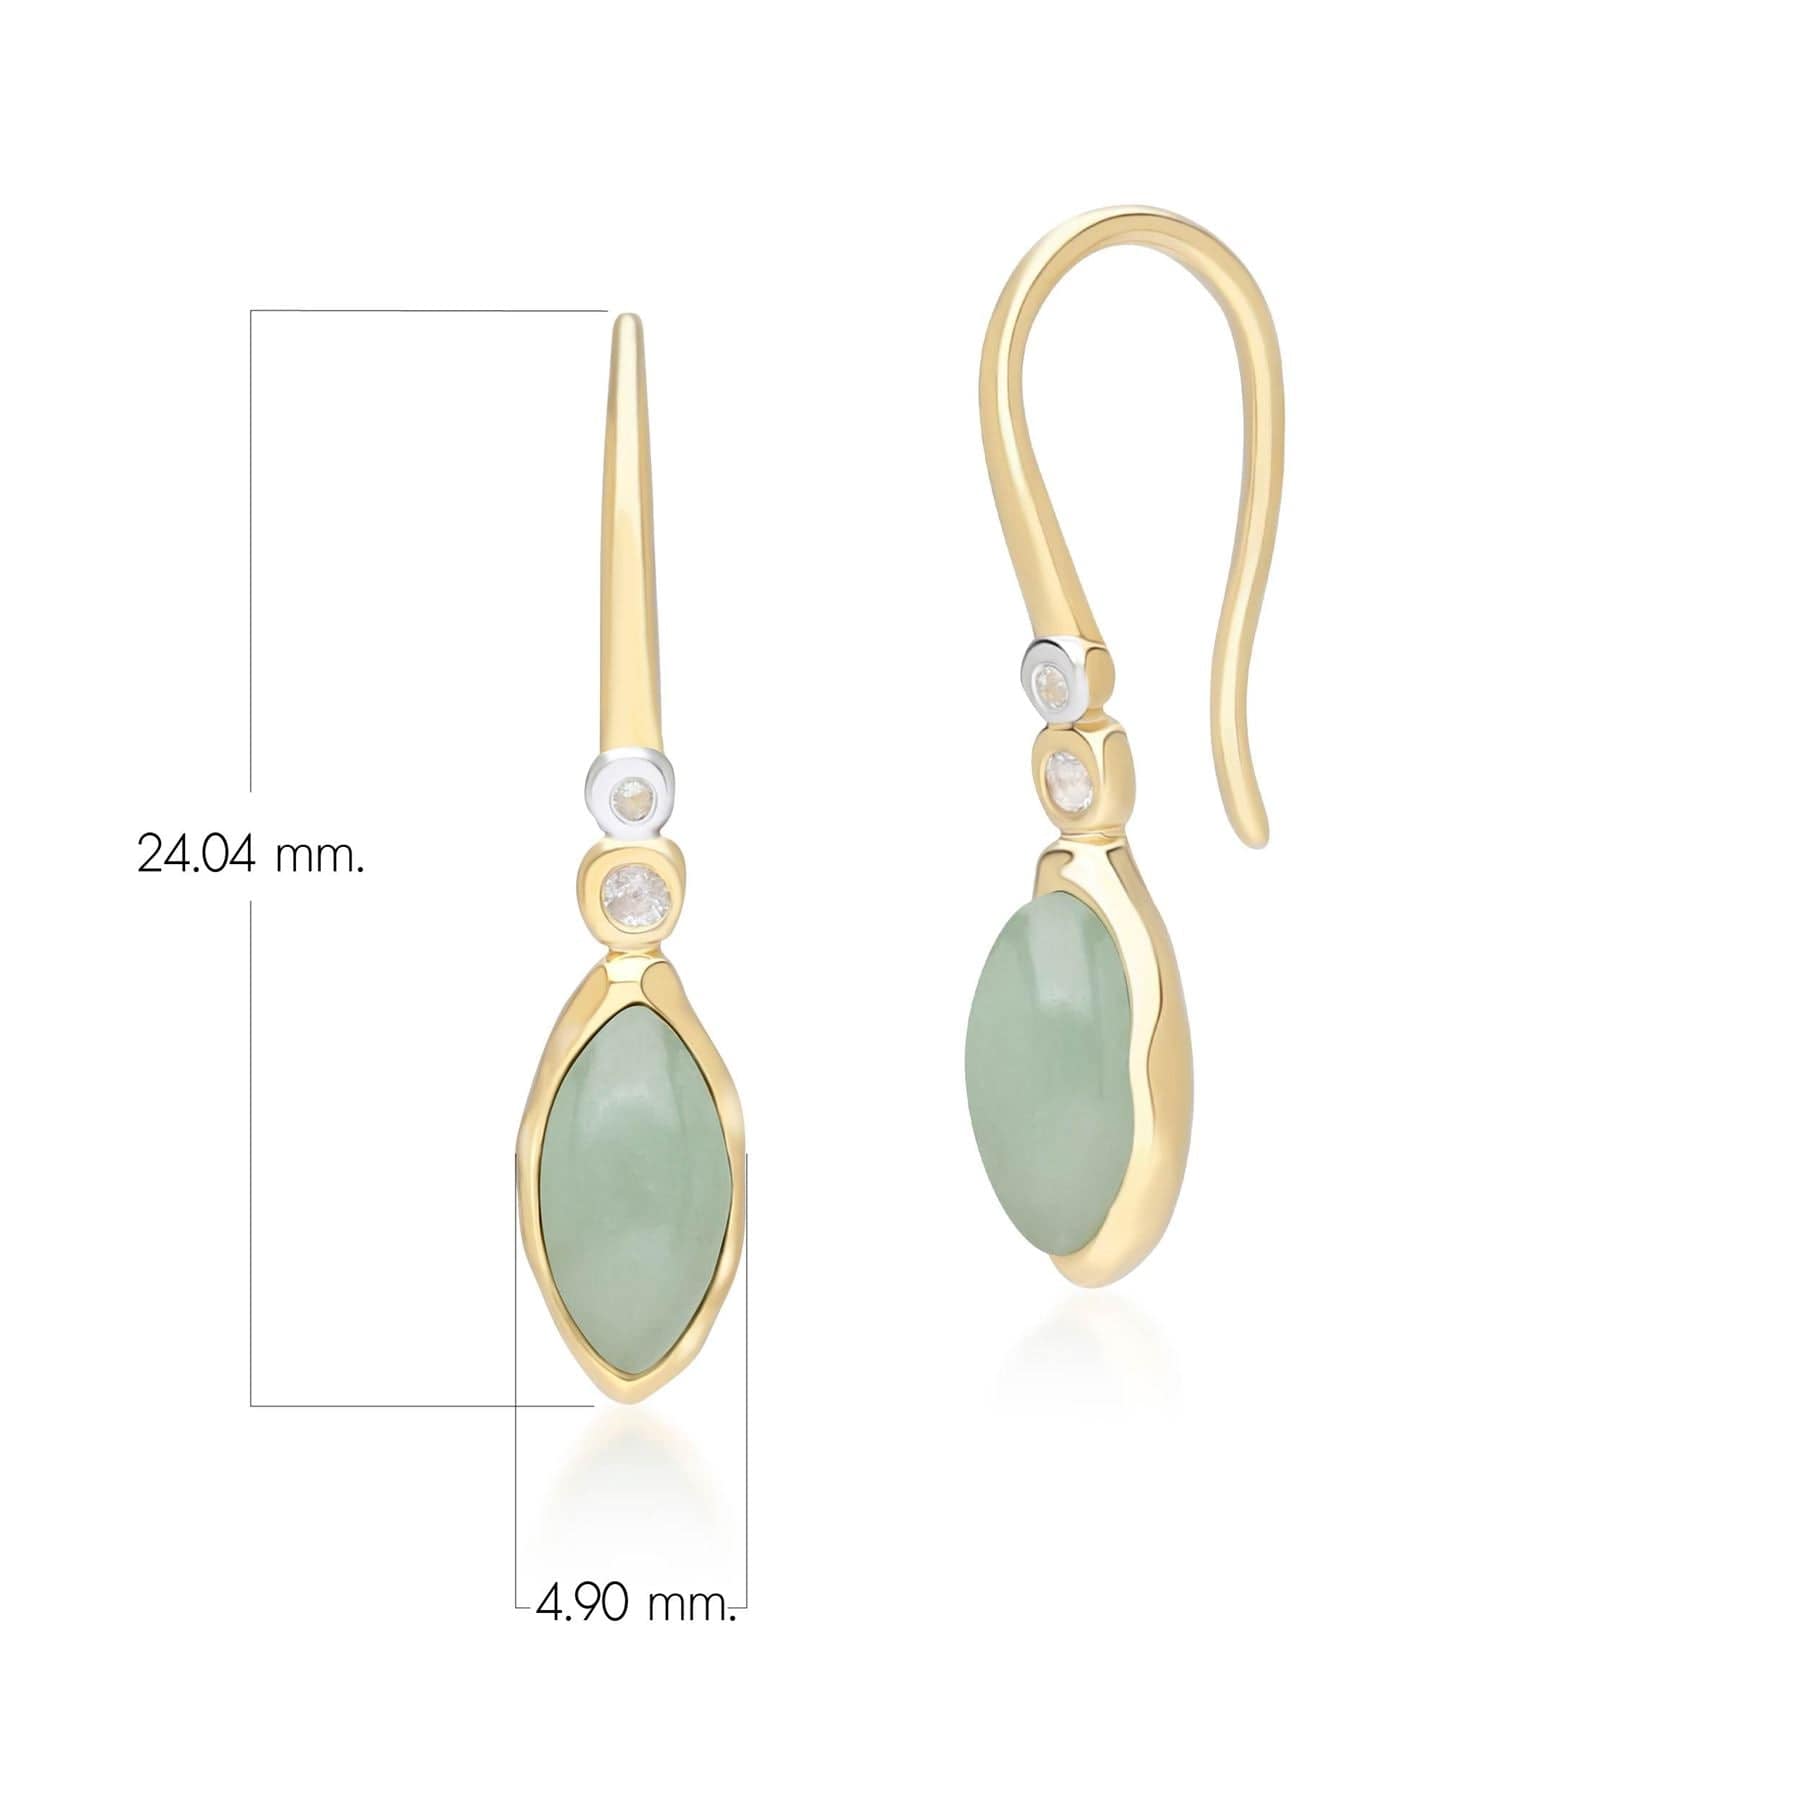 253E418602925 Irregular Marquise Dyed Green Jade & Topaz Drop Earrings In 18ct Gold Plated SterlIng Silver Dimensions